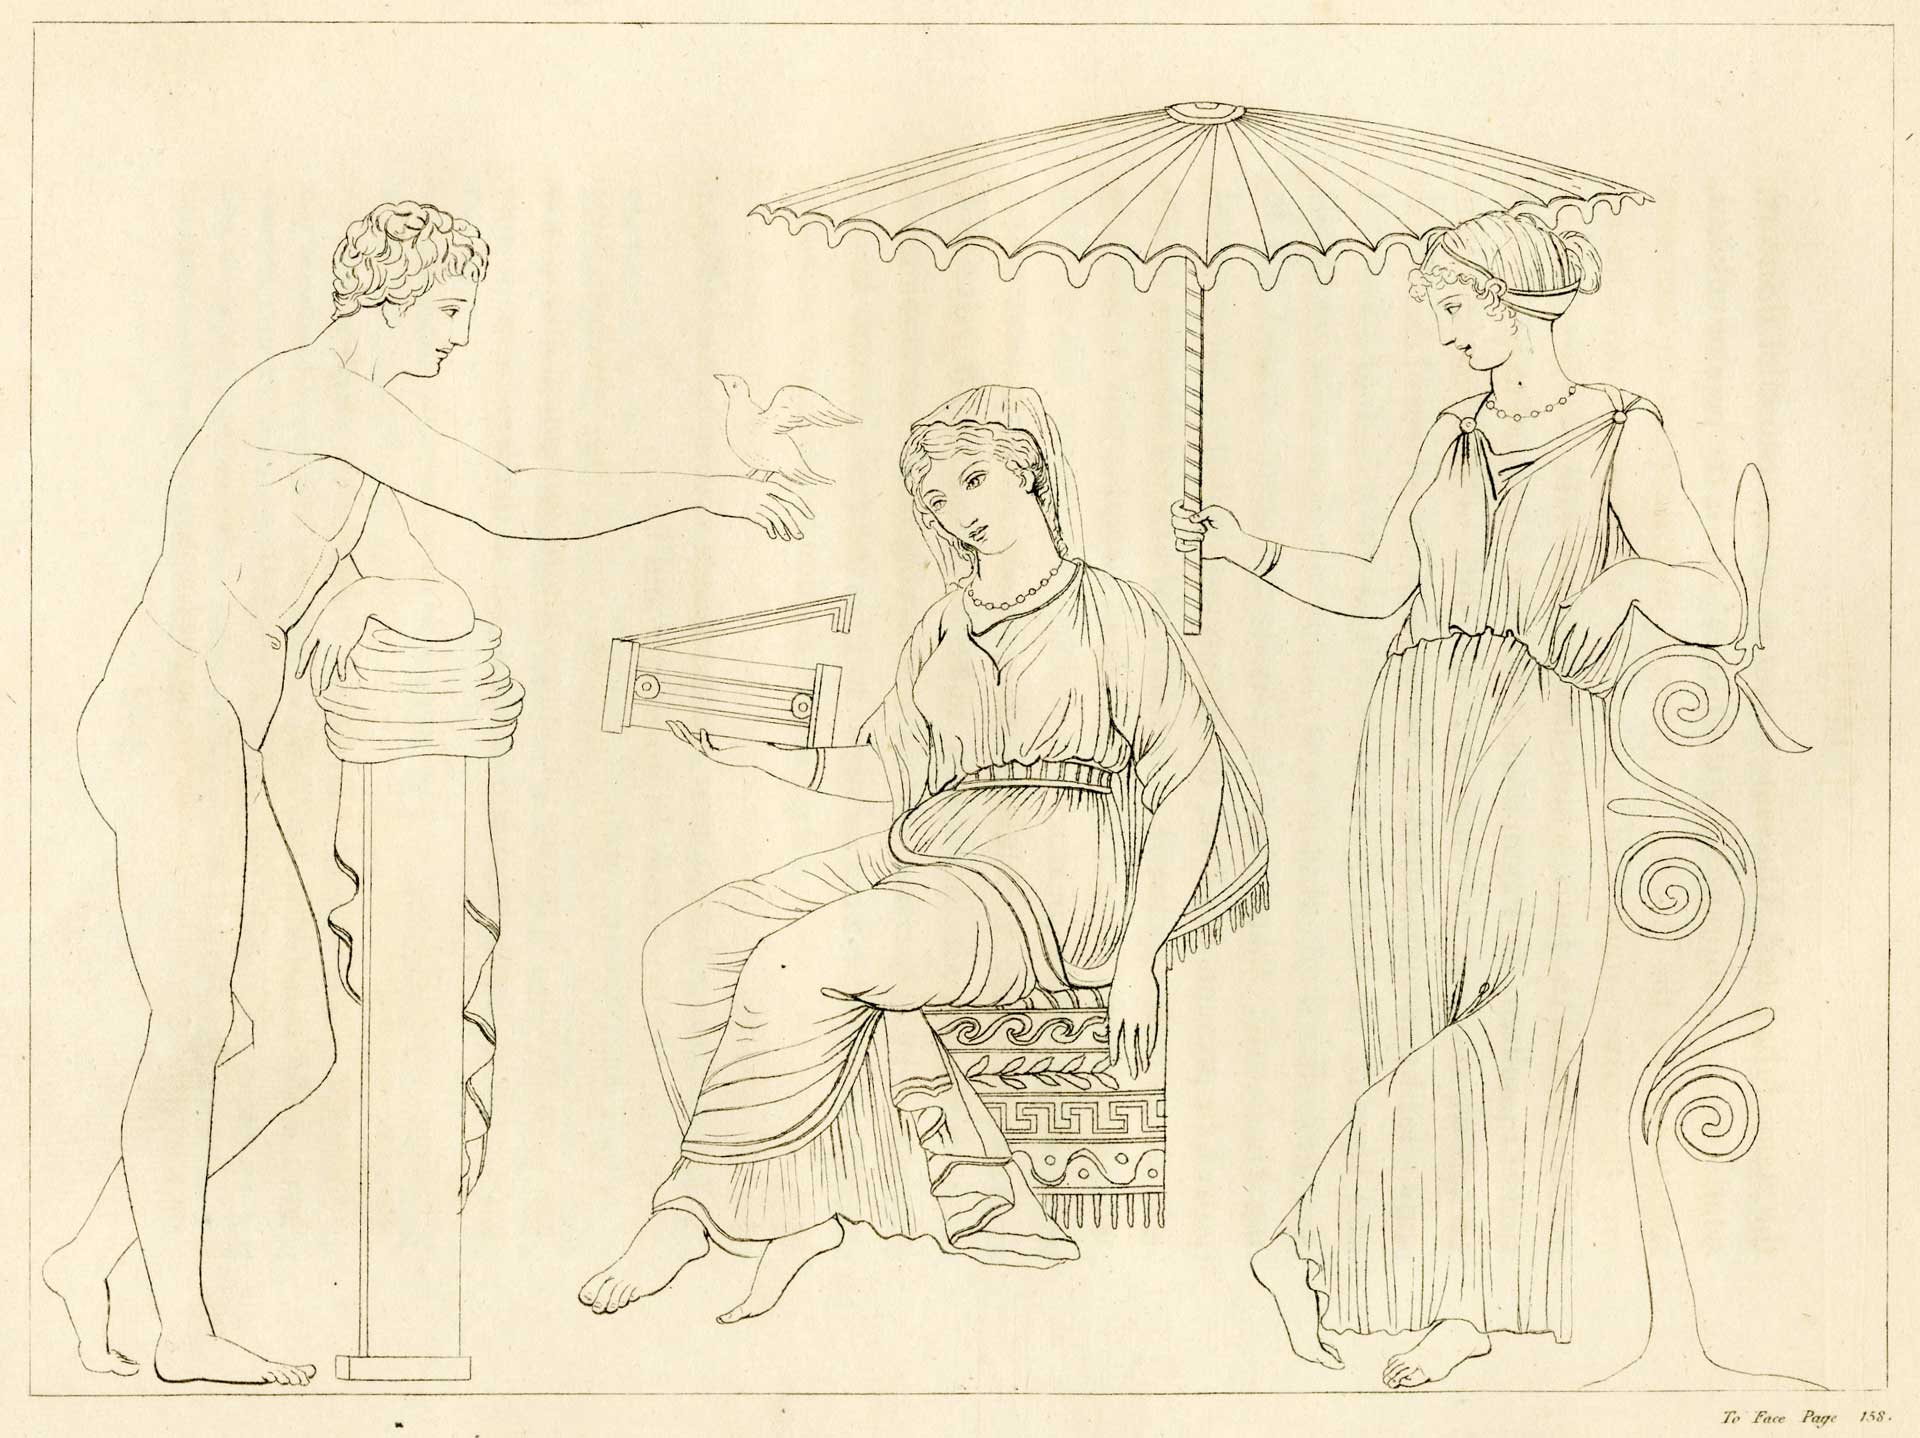 Illustration from James Christie, An Inquiry into the Ancient Greek Game